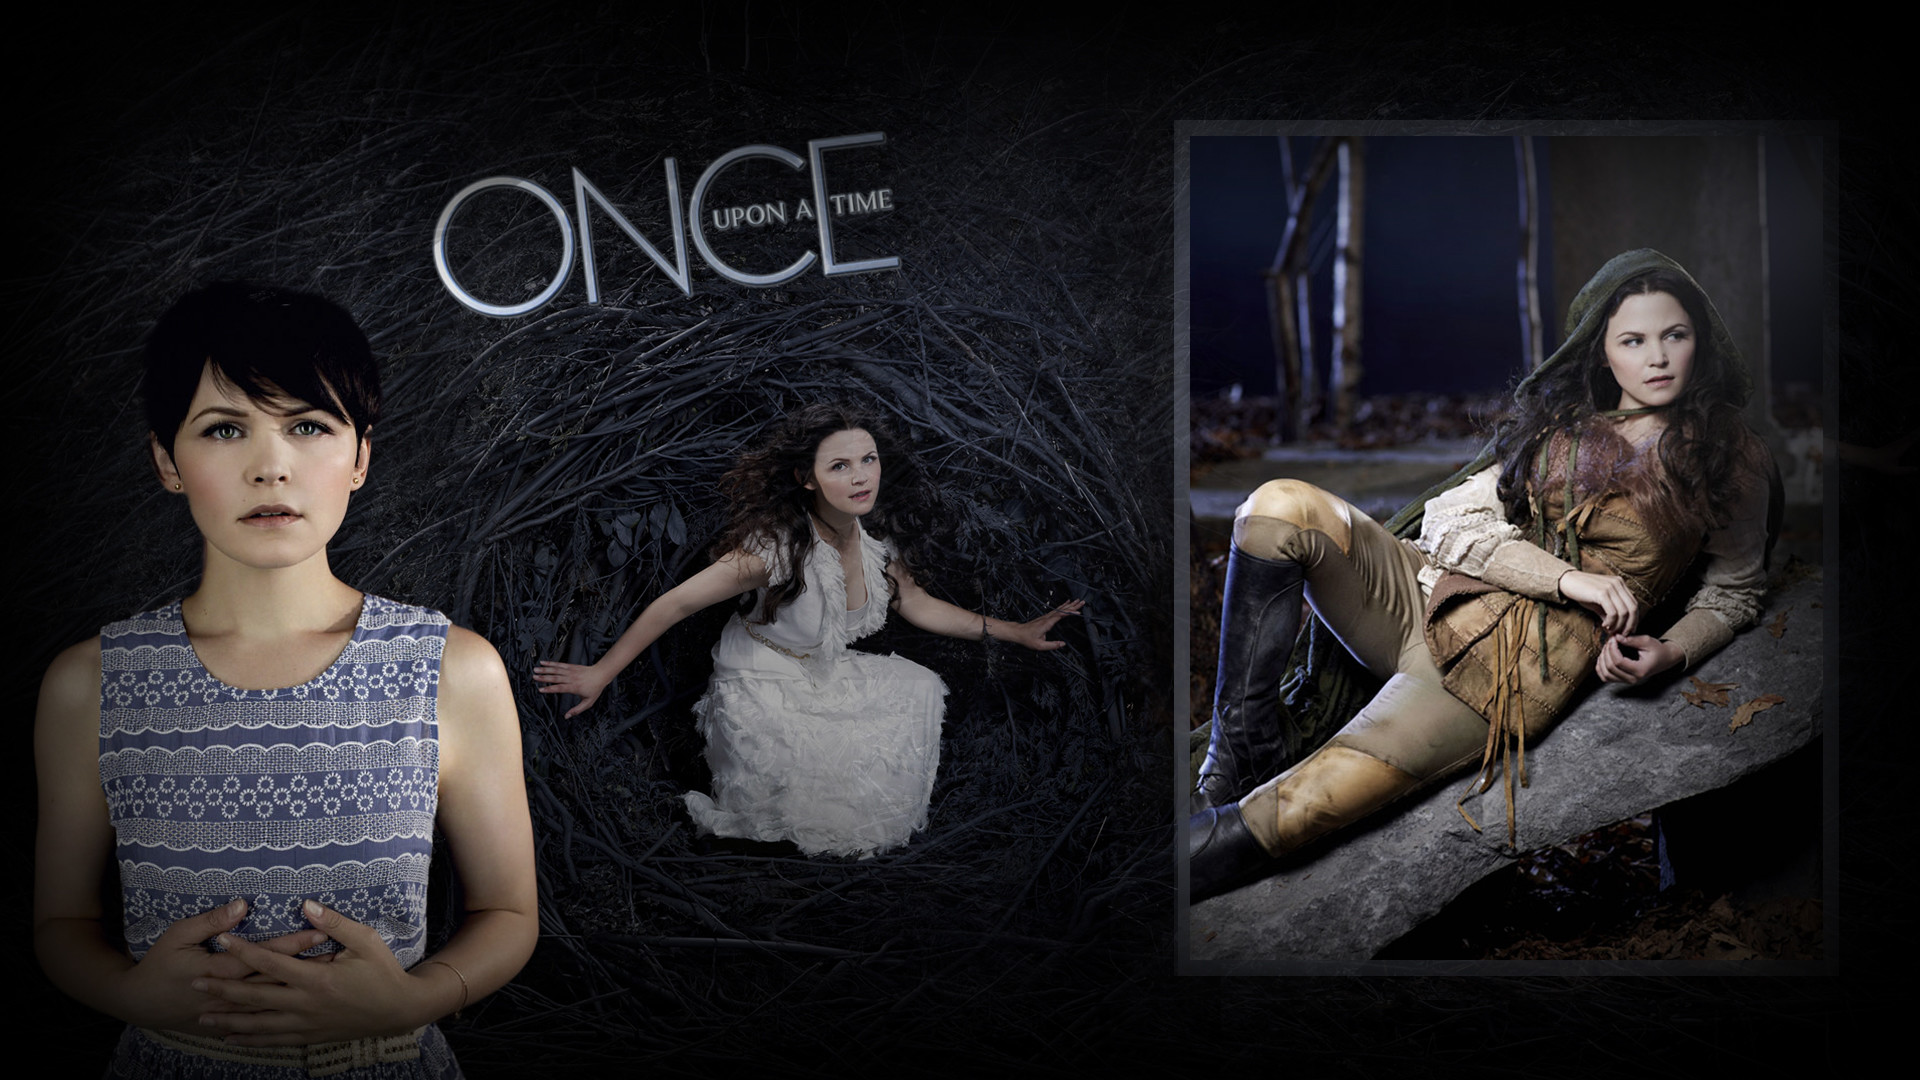 1920x1080 ... Once Upon a Time Wallpaper 9 by Alexandreholz